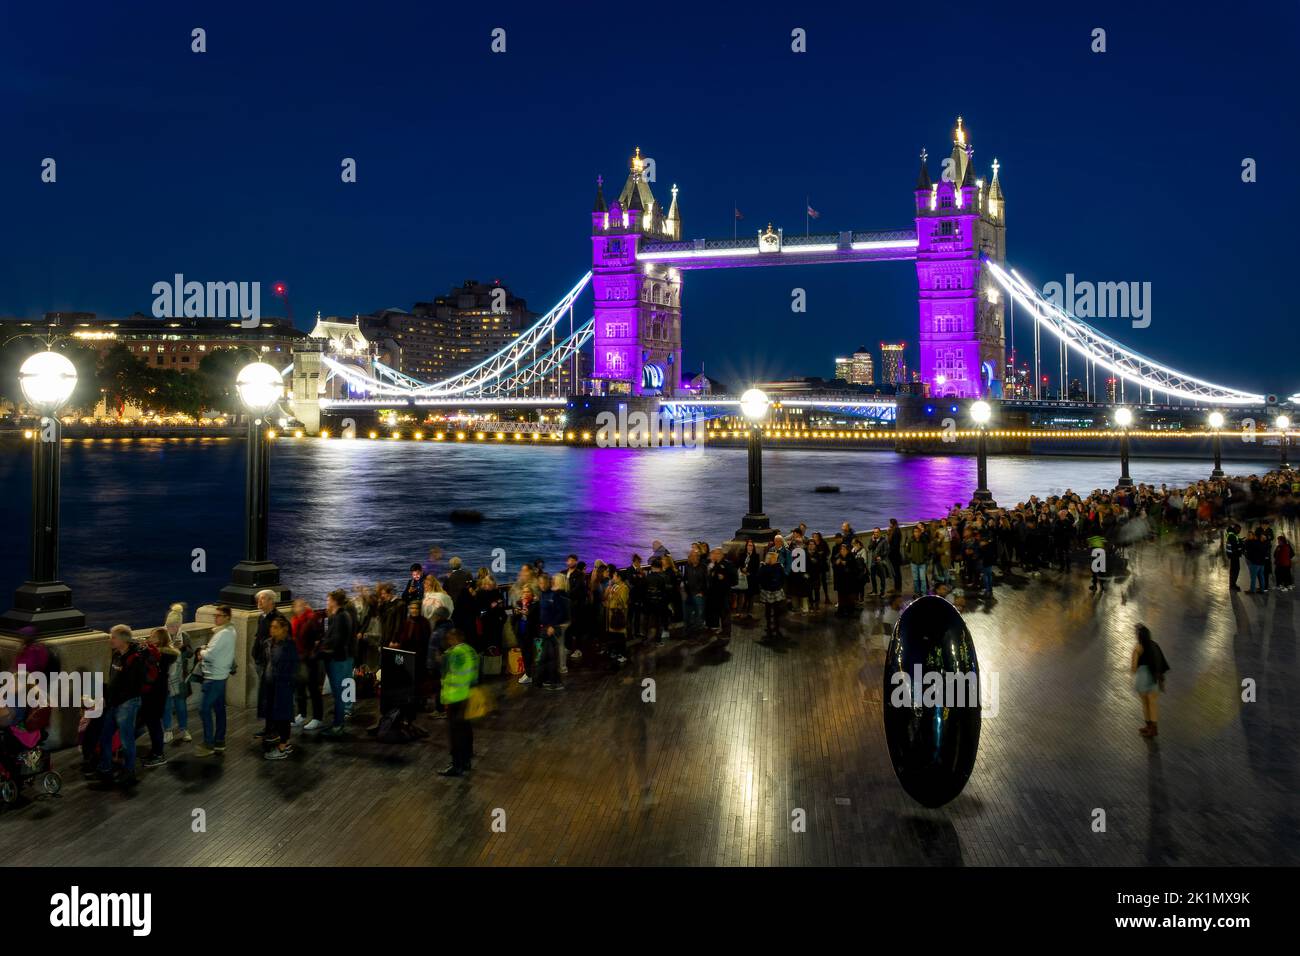 The Queue to see Queen Elizabeth II lying-in-state near Tower Bridge at night in London, UK on September 17, 2022 Stock Photo